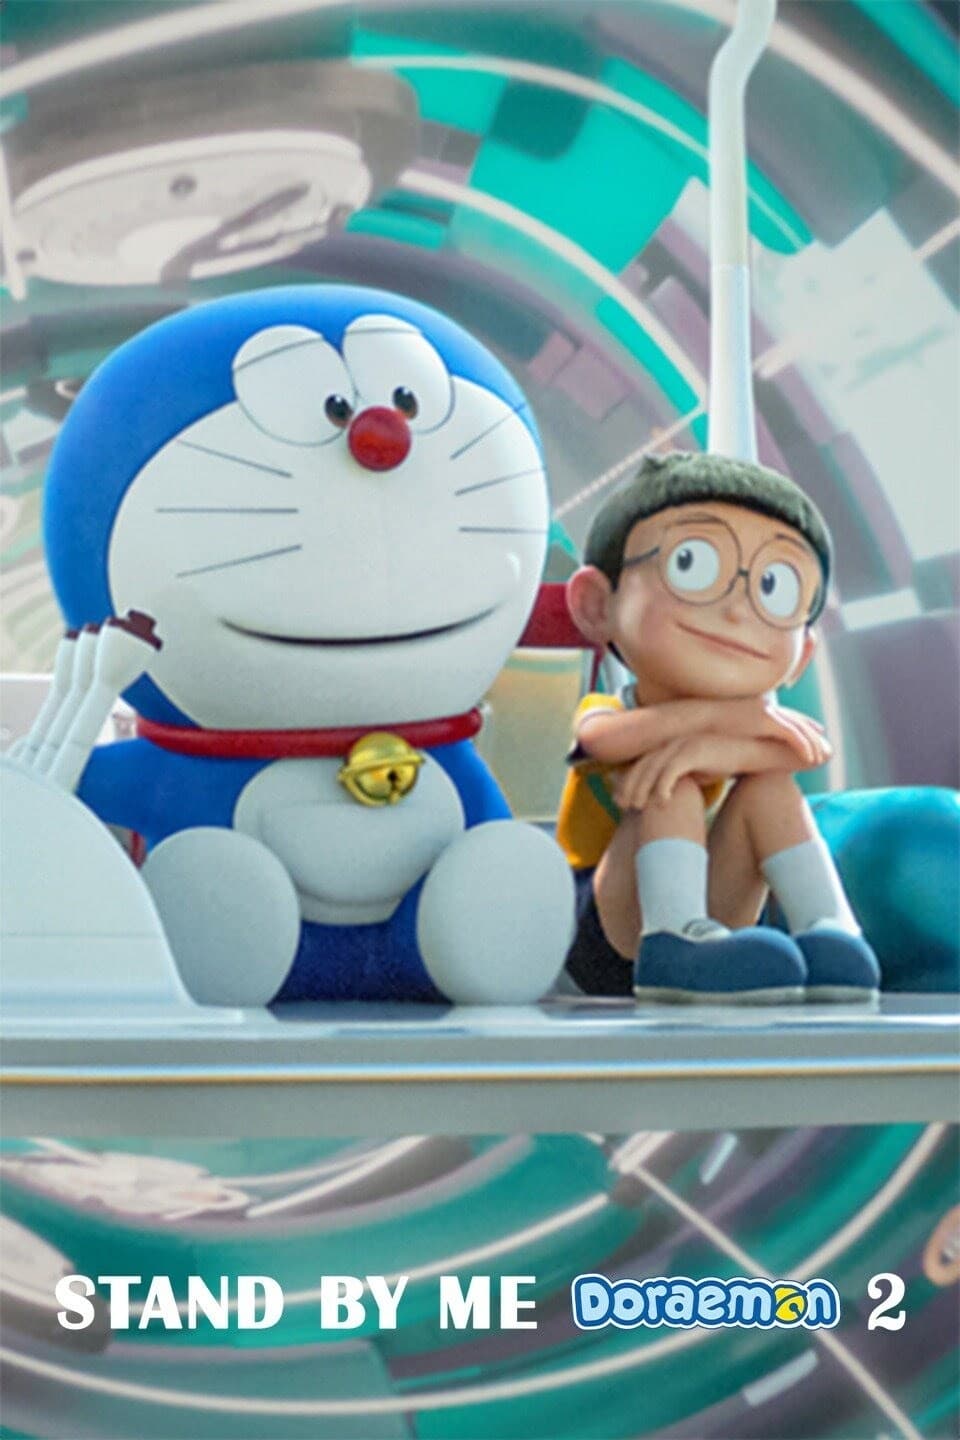 Malay by doraemon full stand 2 me movie